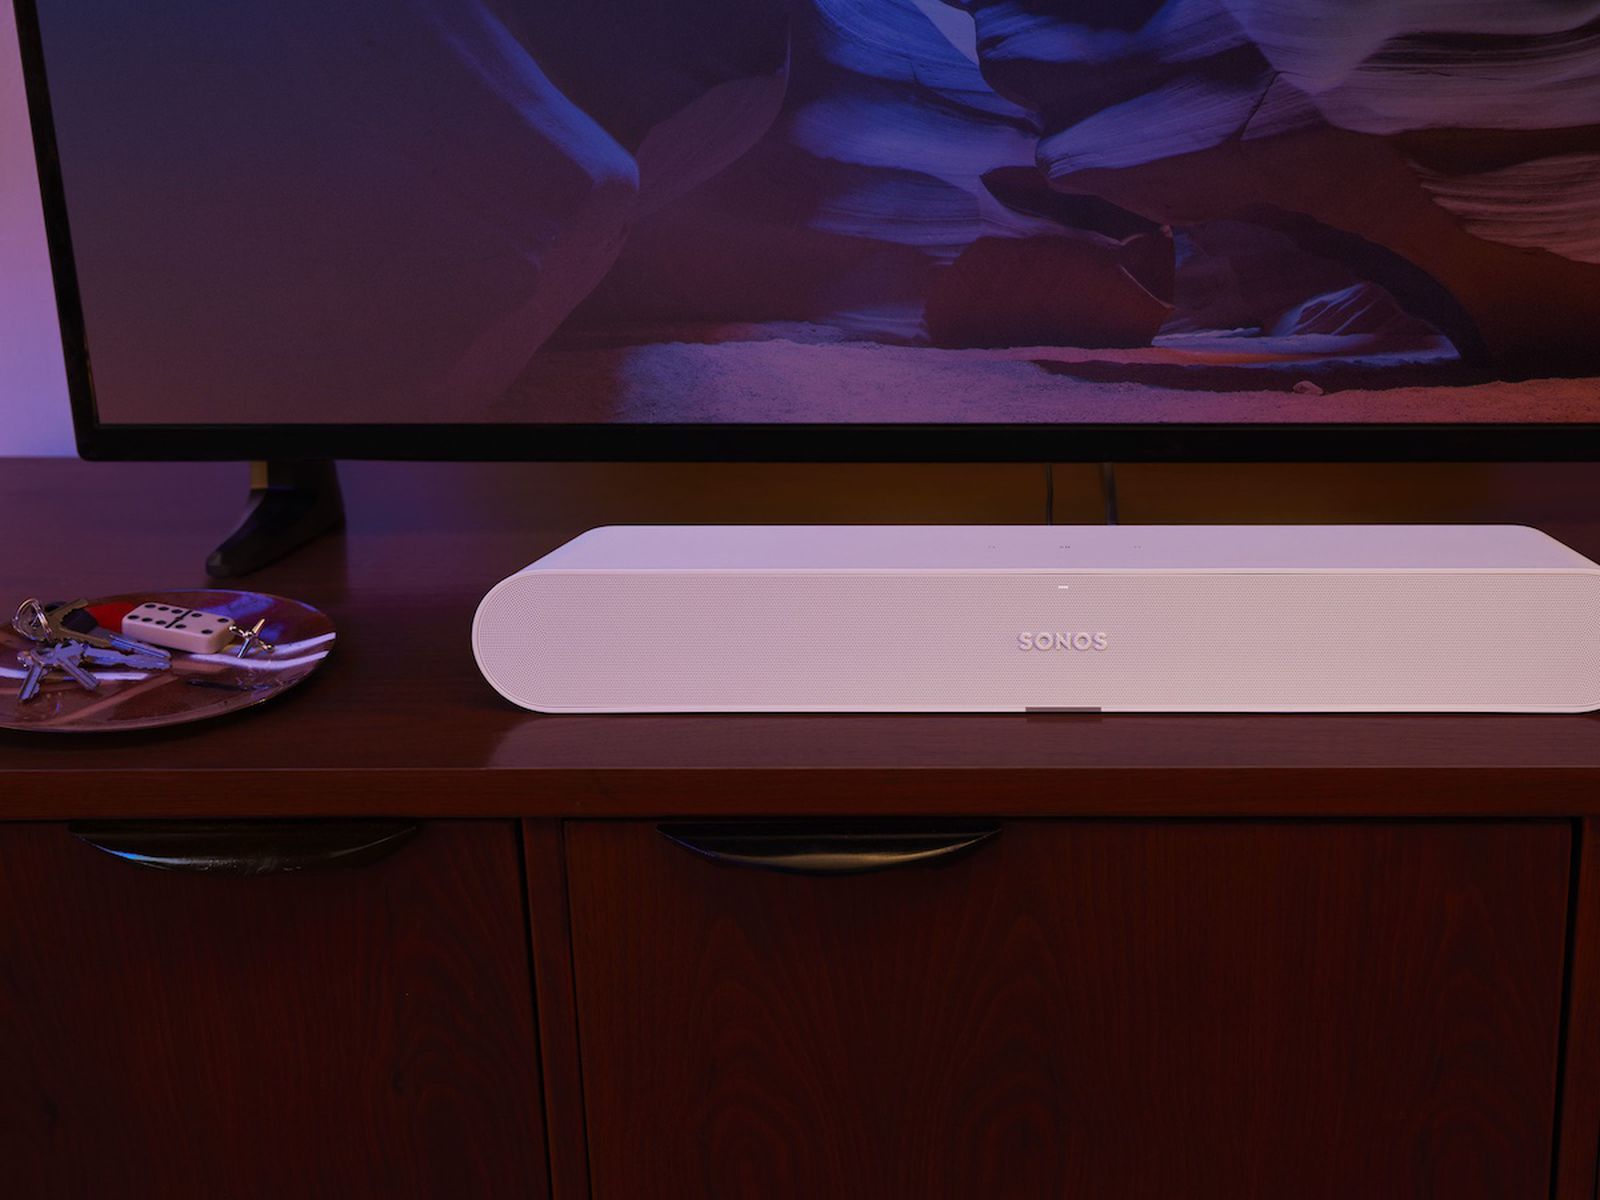 Announces Lower-Priced Soundbar With AirPlay 2 Support, 'Hey Sonos' Voice Control Apple Music - MacRumors